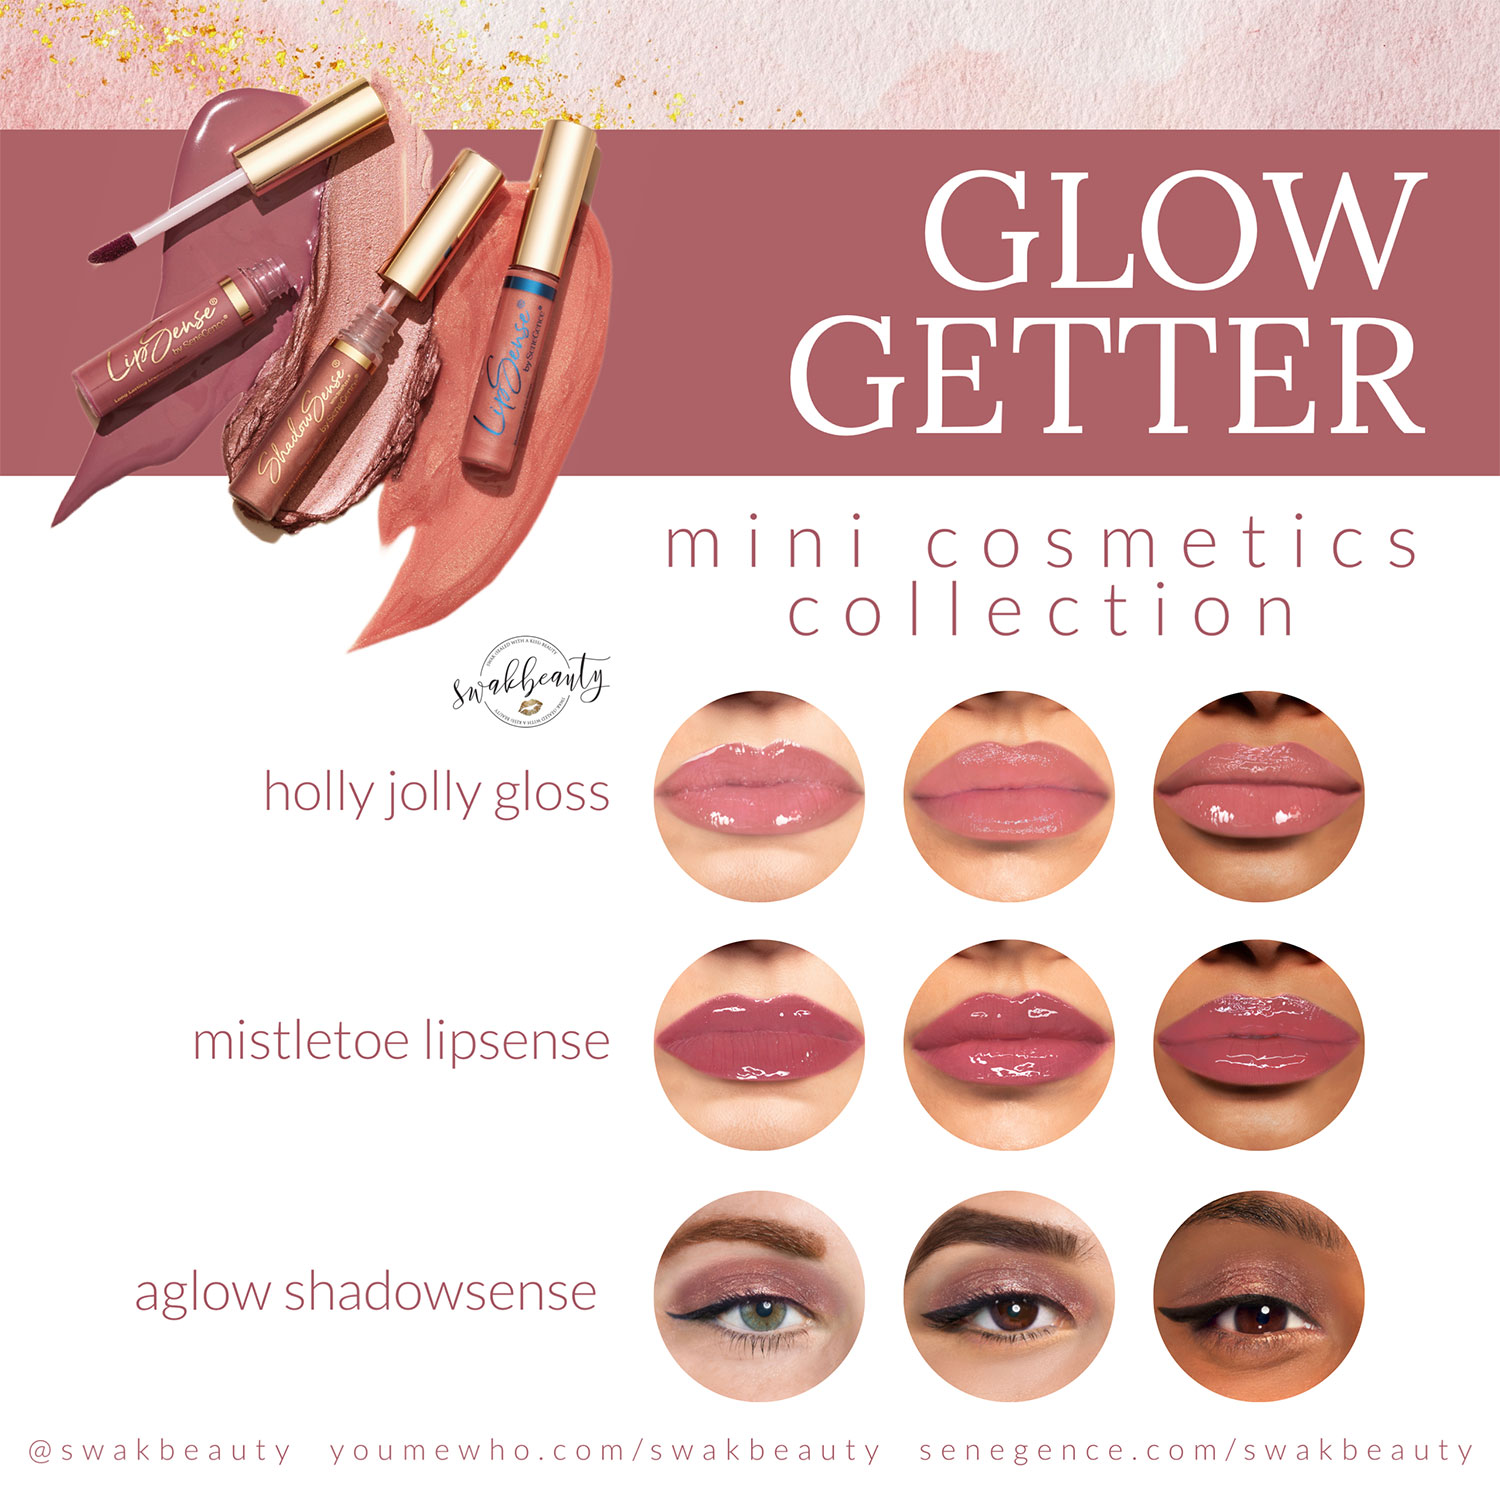 Glow Getter Mini Cosmetics Collection –